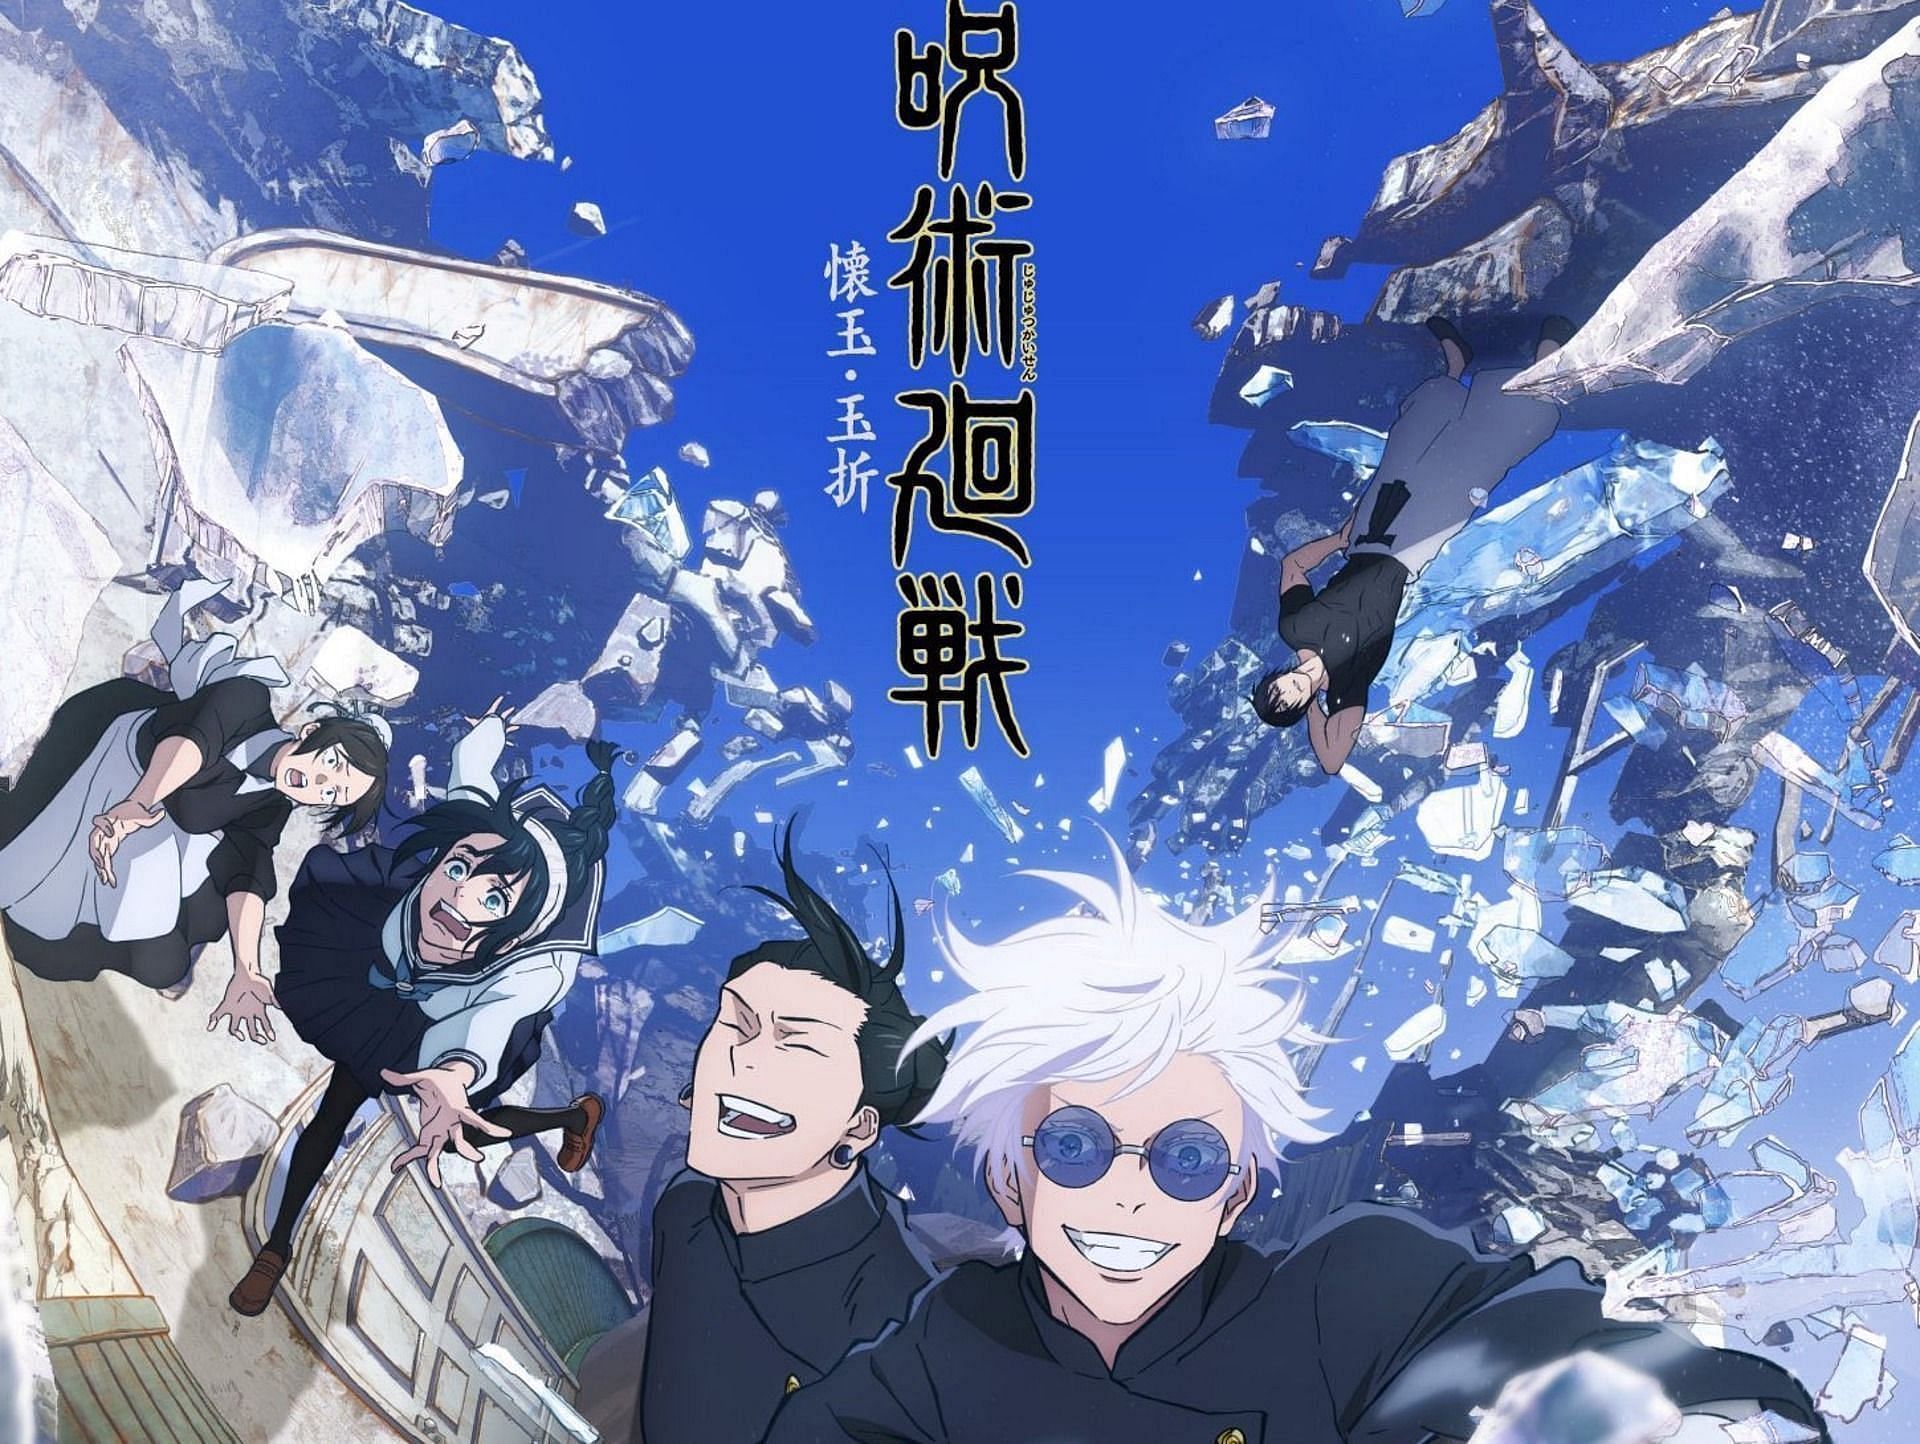 Jujutsu Kaisen season 2 official trailer crosses 10 million views, and fans are delighted (Image via MAPPA)